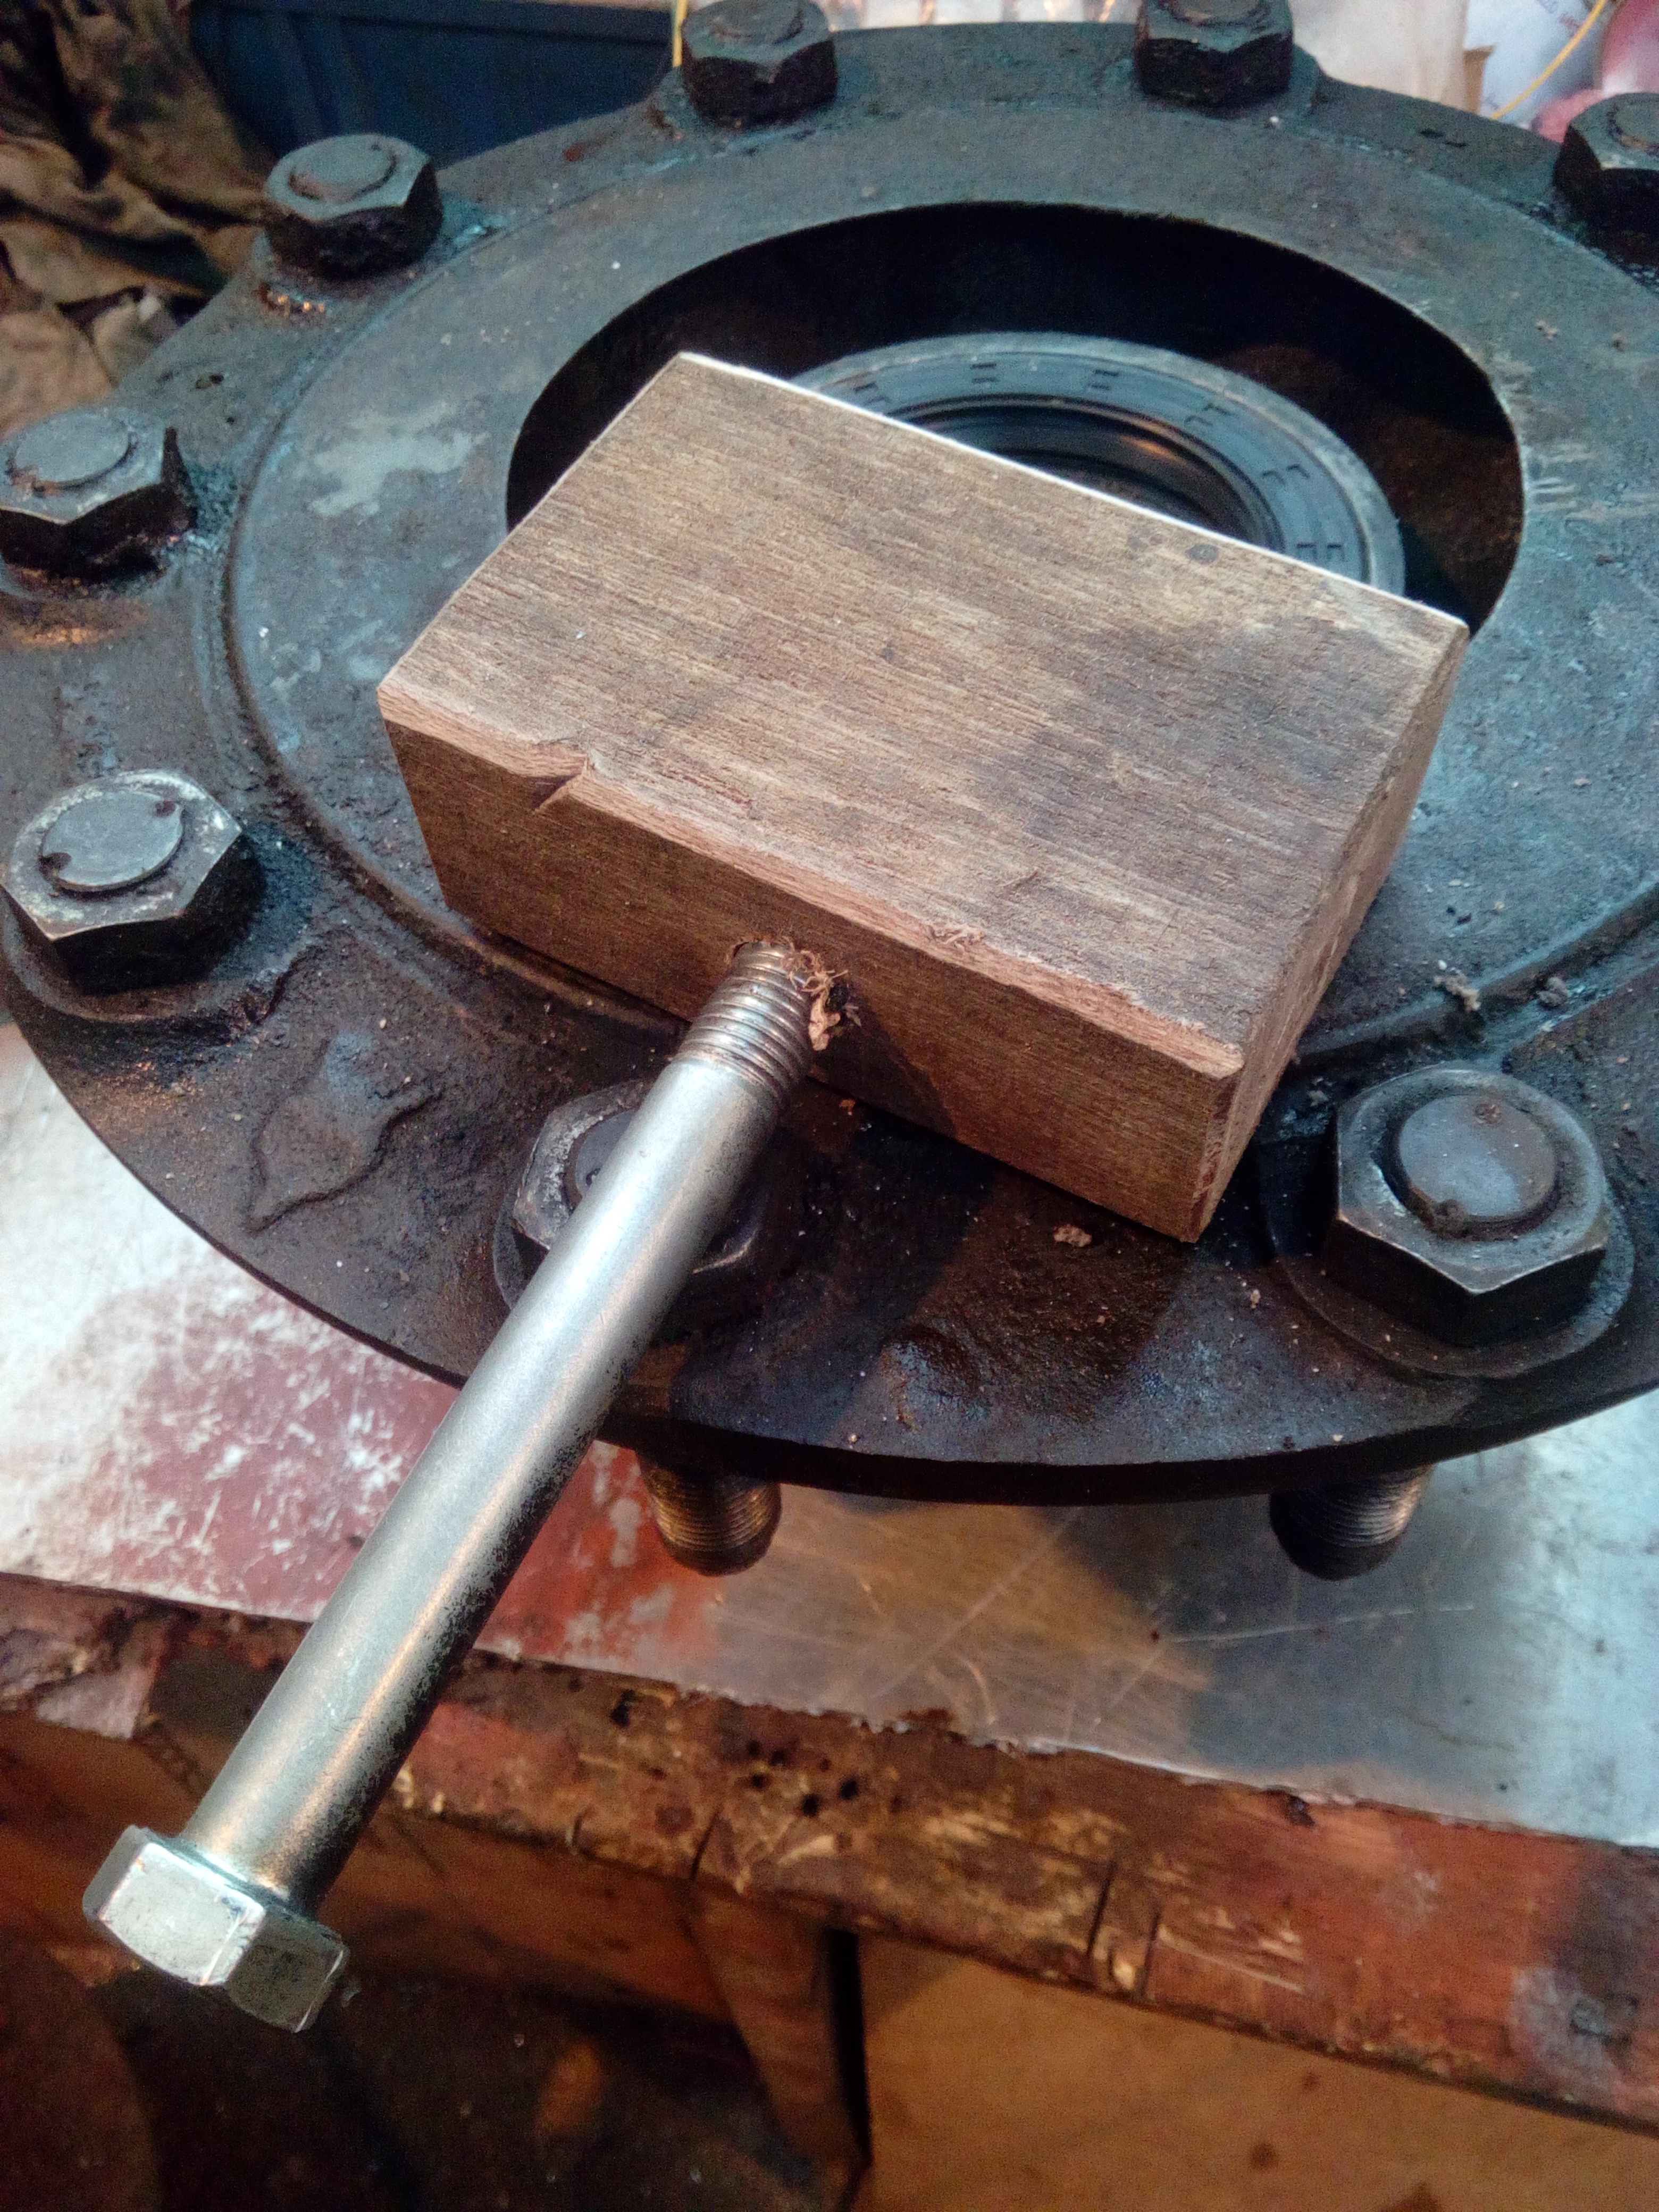 Hub upside down on the workbench, with a new seal in it. Laying
atop the hub is a crude wooden mallet made by screwing a large bolt
into a block of hardwood timber.